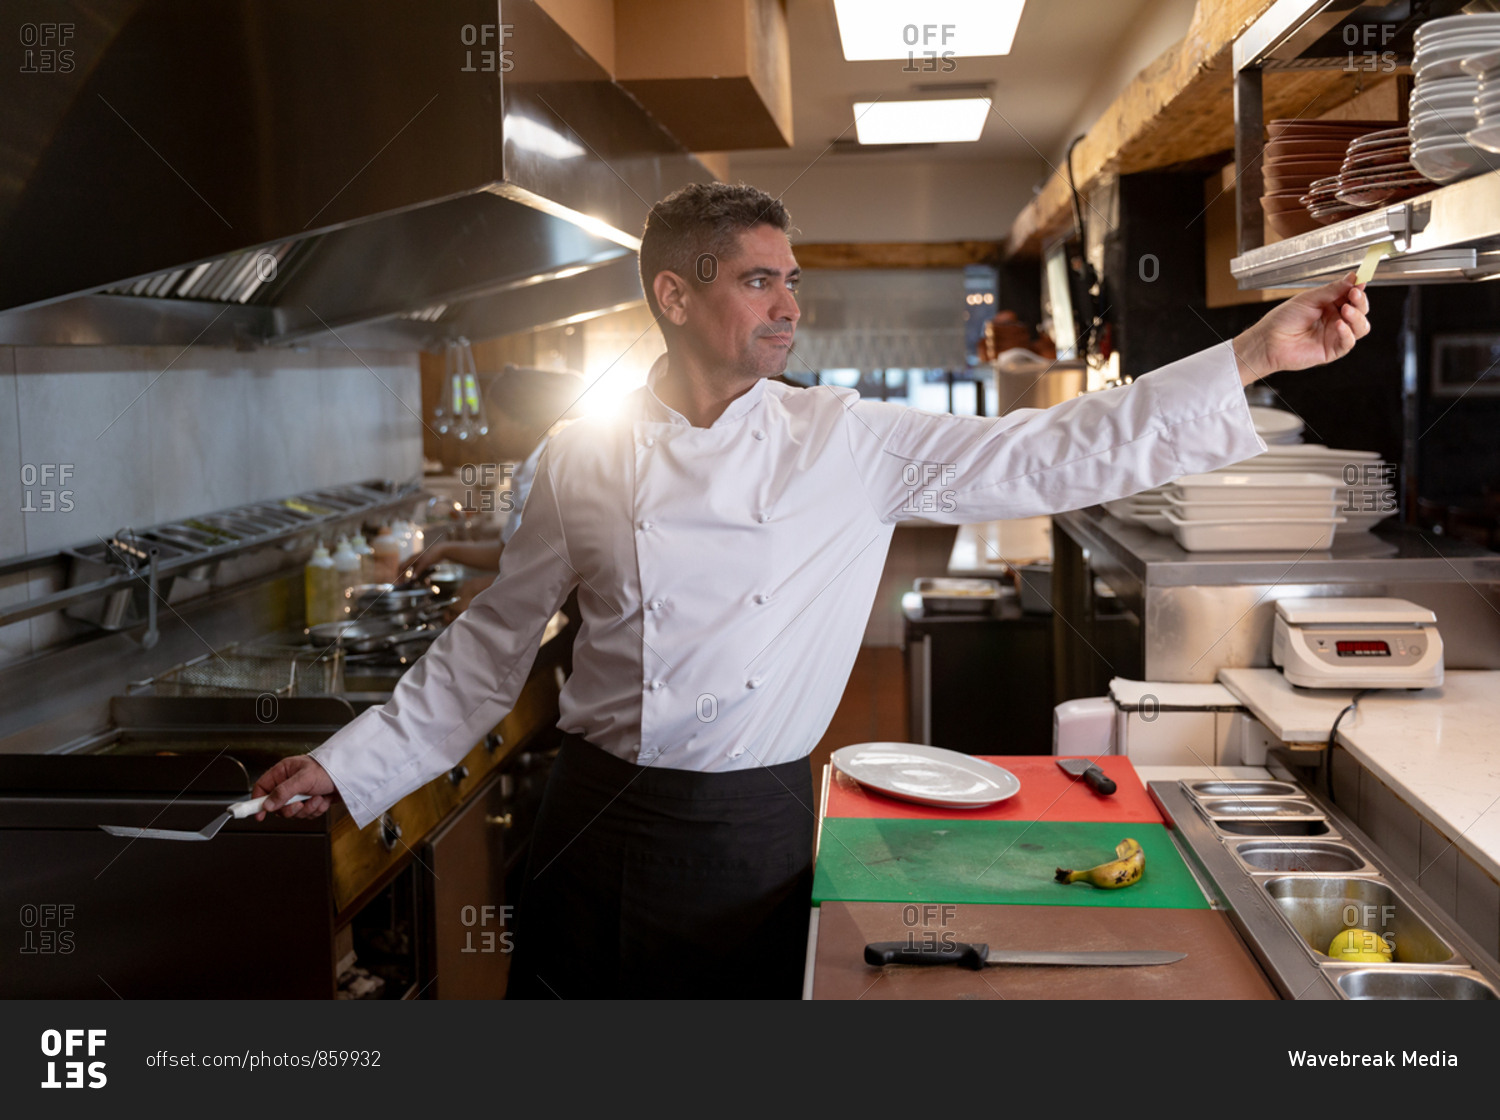 Front view close up of a middle aged Caucasian male chef reaching out to take an order at the order station in a restaurant kitchen